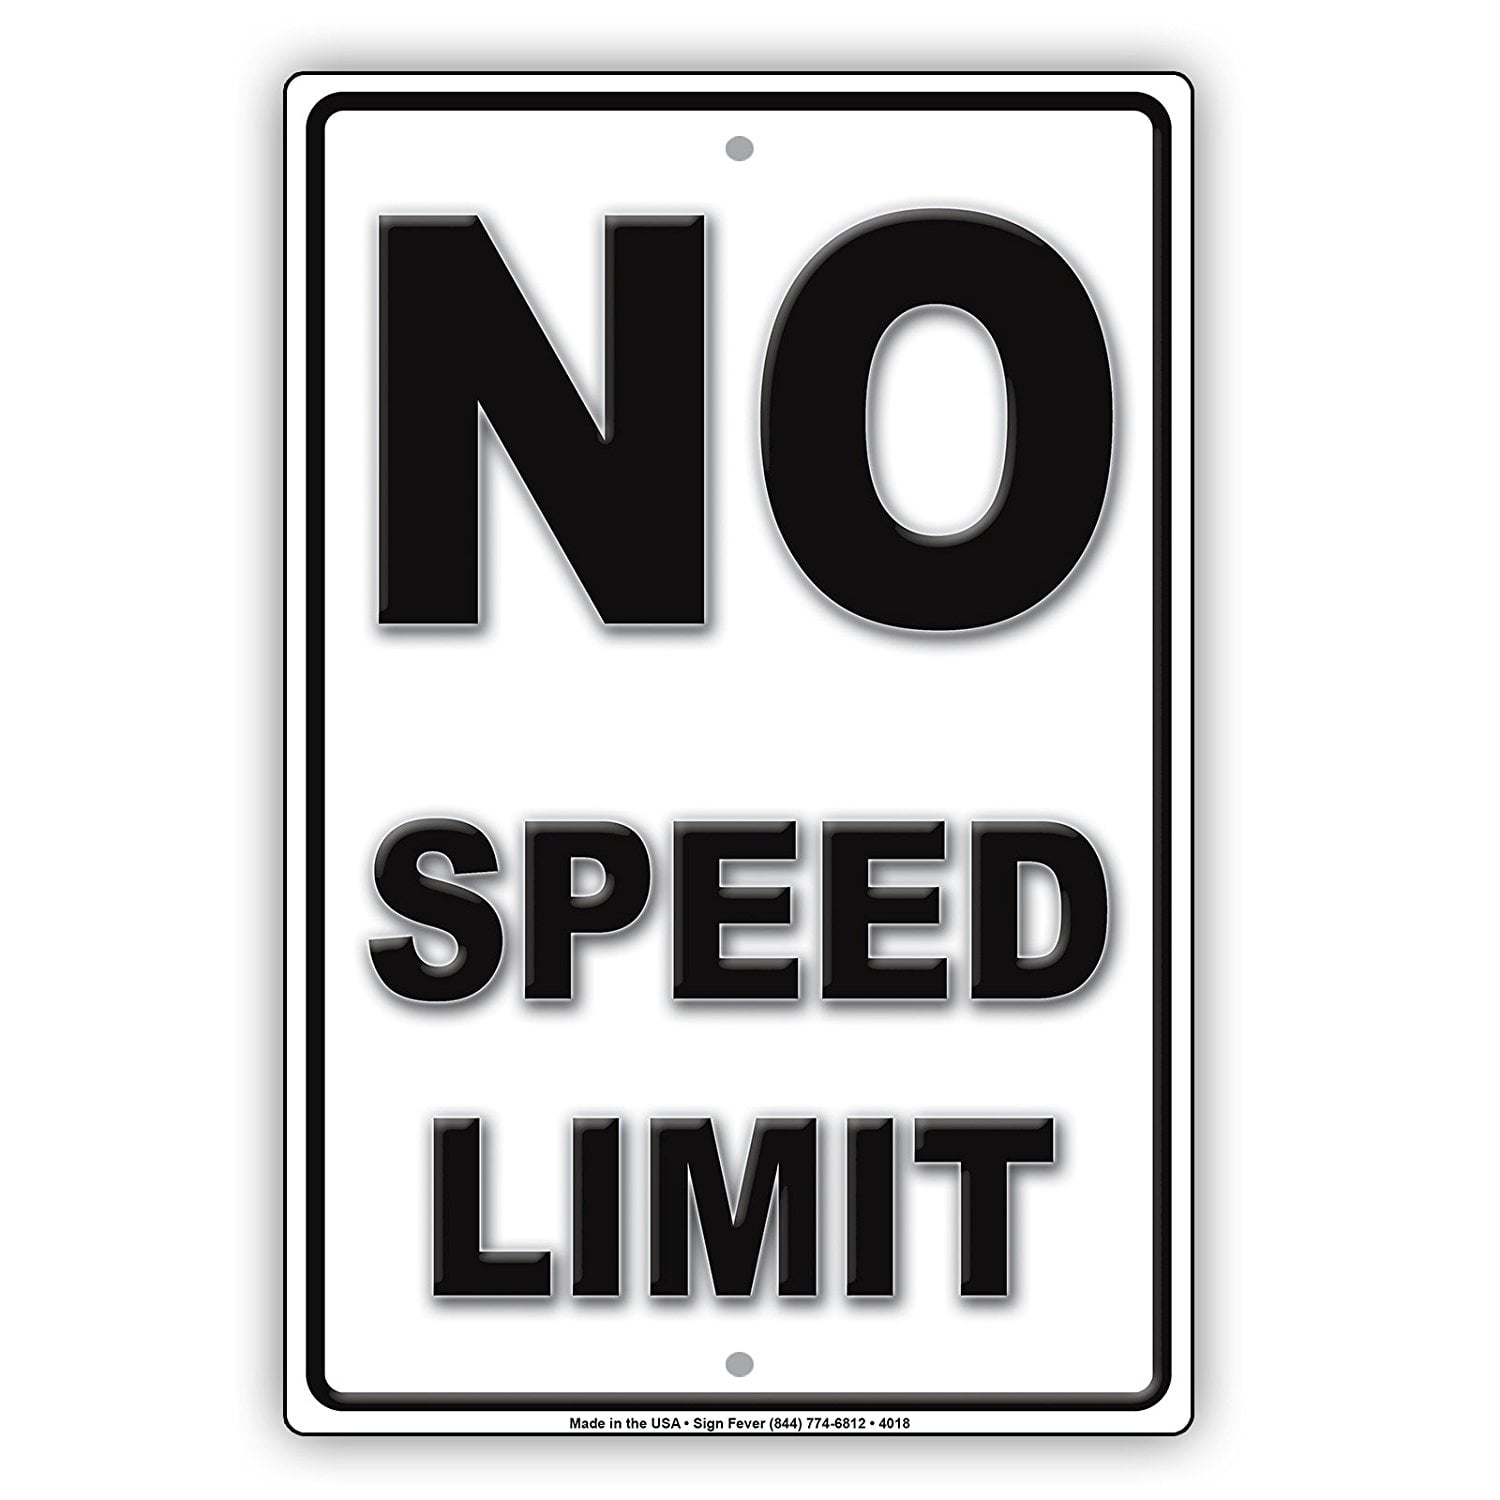 Speed Limit VERY VERY SLOW Ridiculous Humor Gag Jokes Funny Caution Notice Aluminum Metal 12x18 Sign Plate 